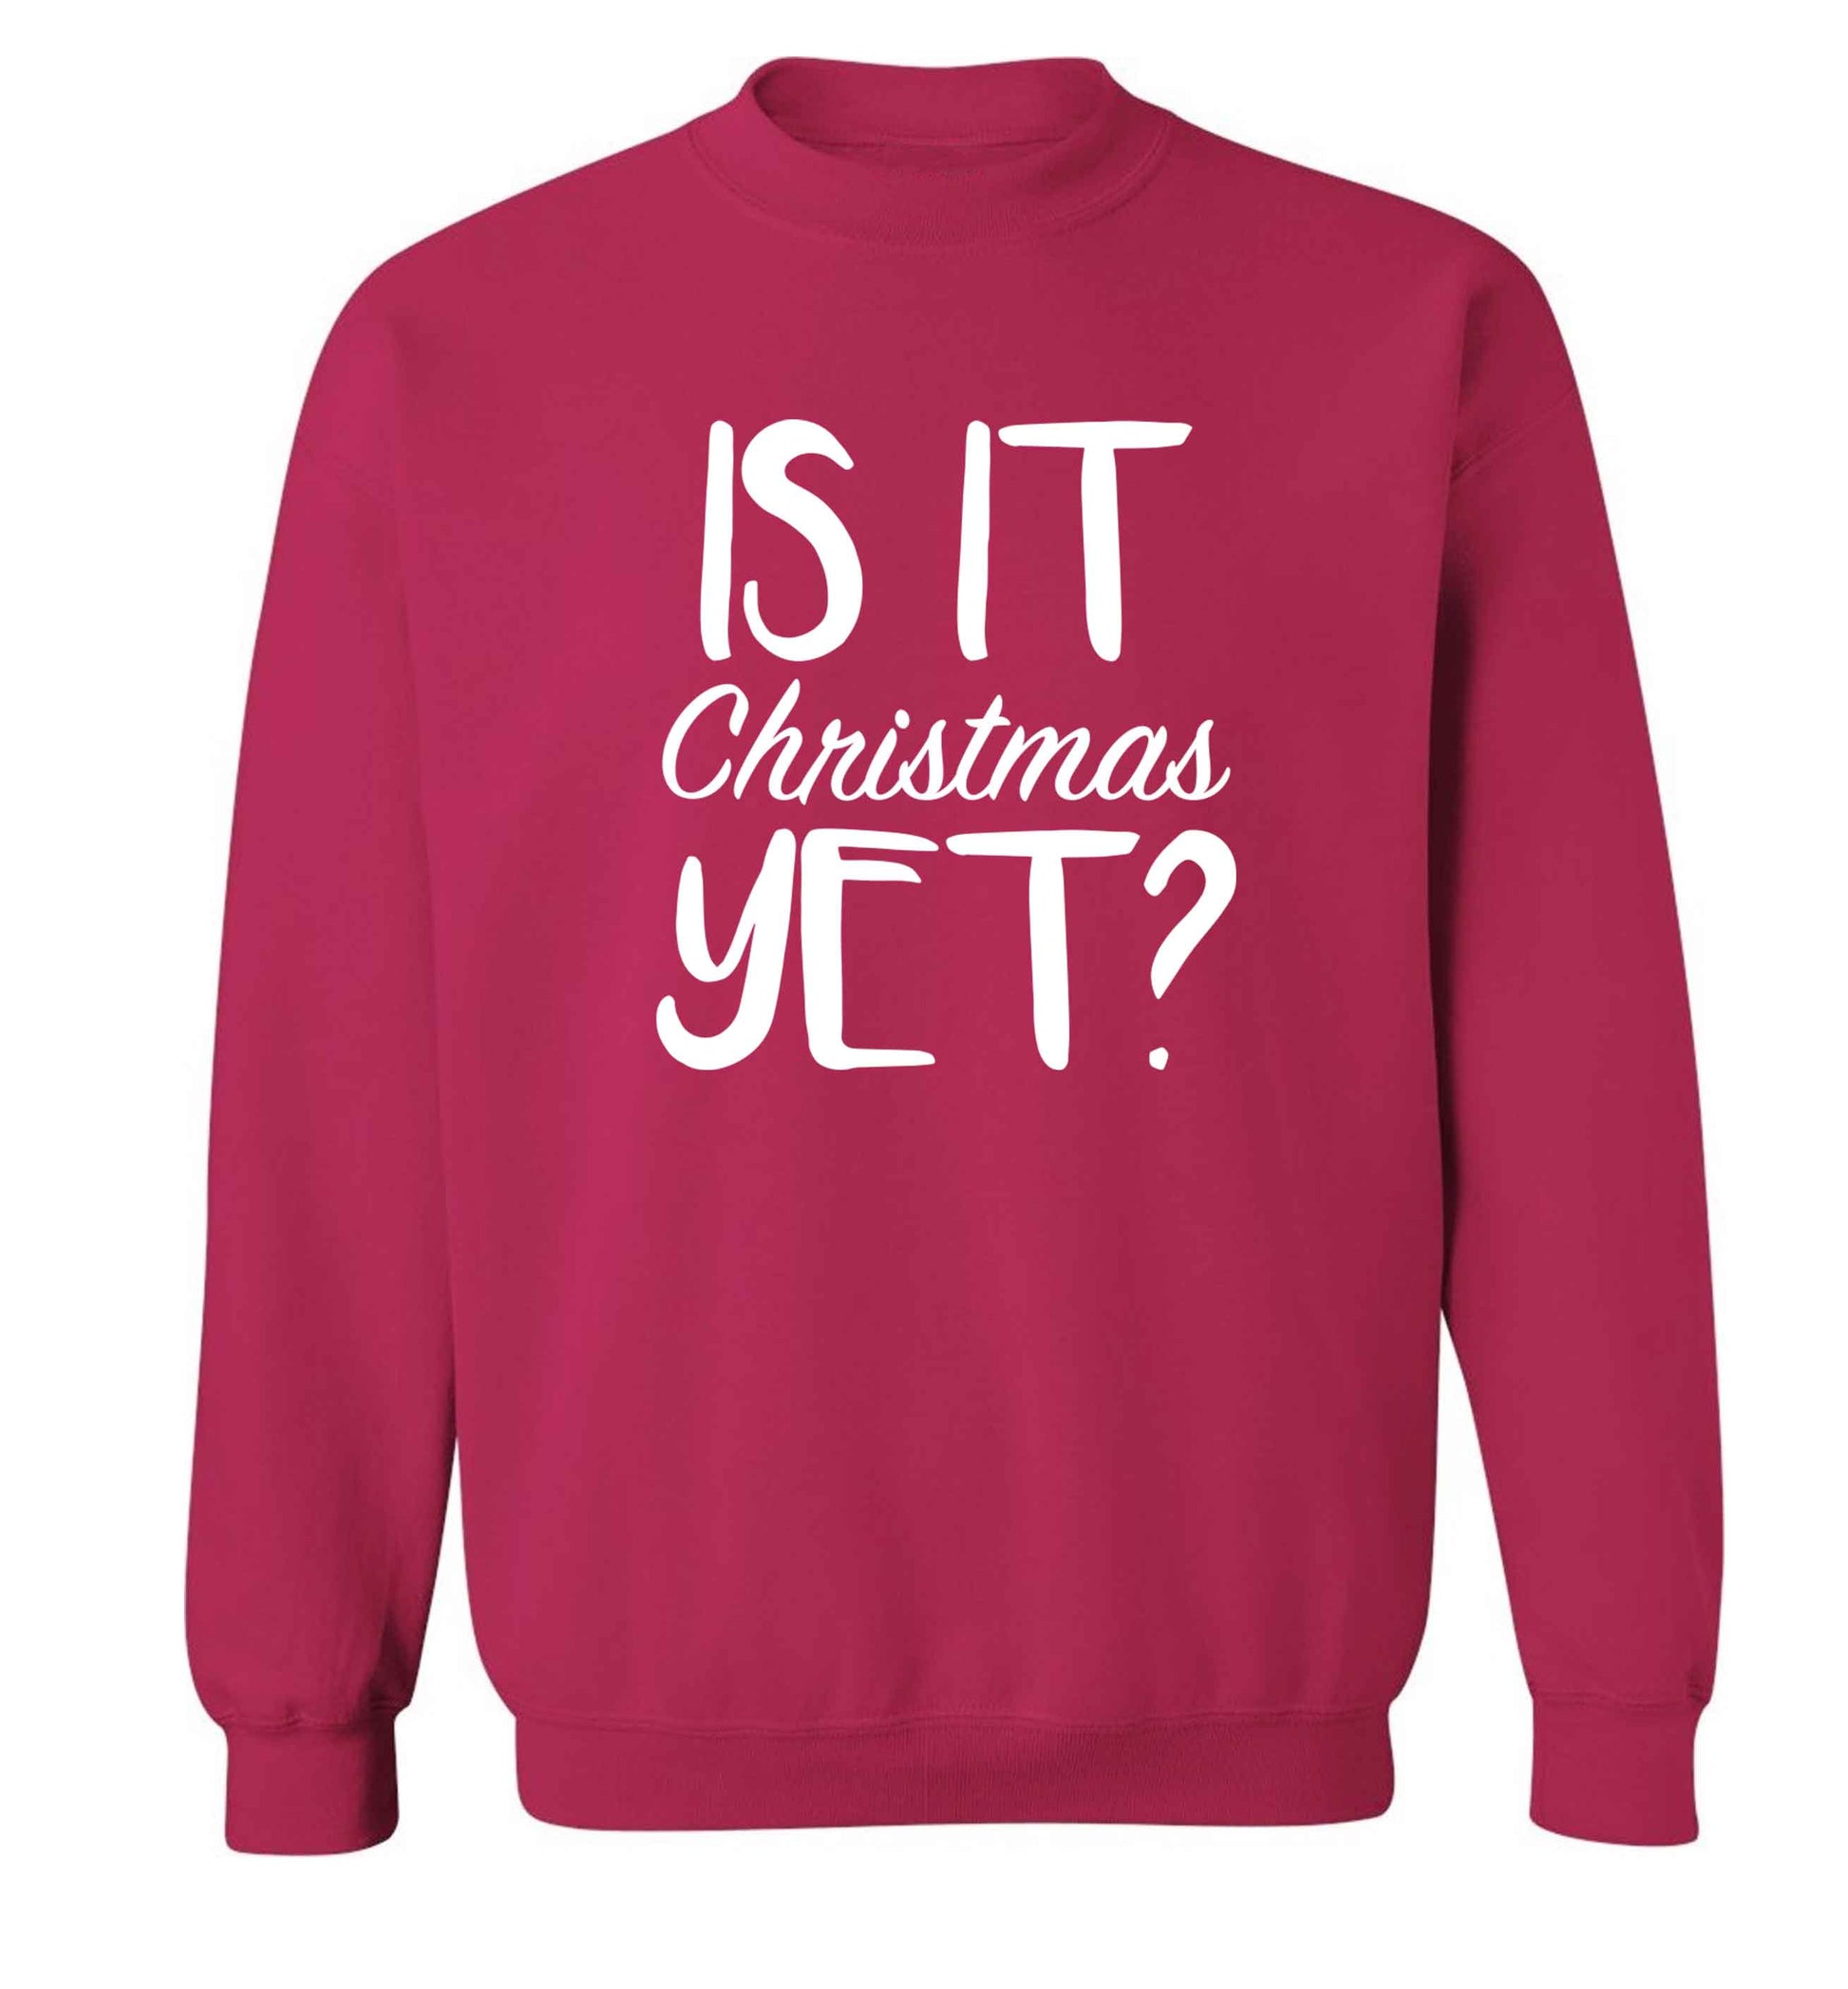 Is it Christmas yet? adult's unisex pink sweater 2XL